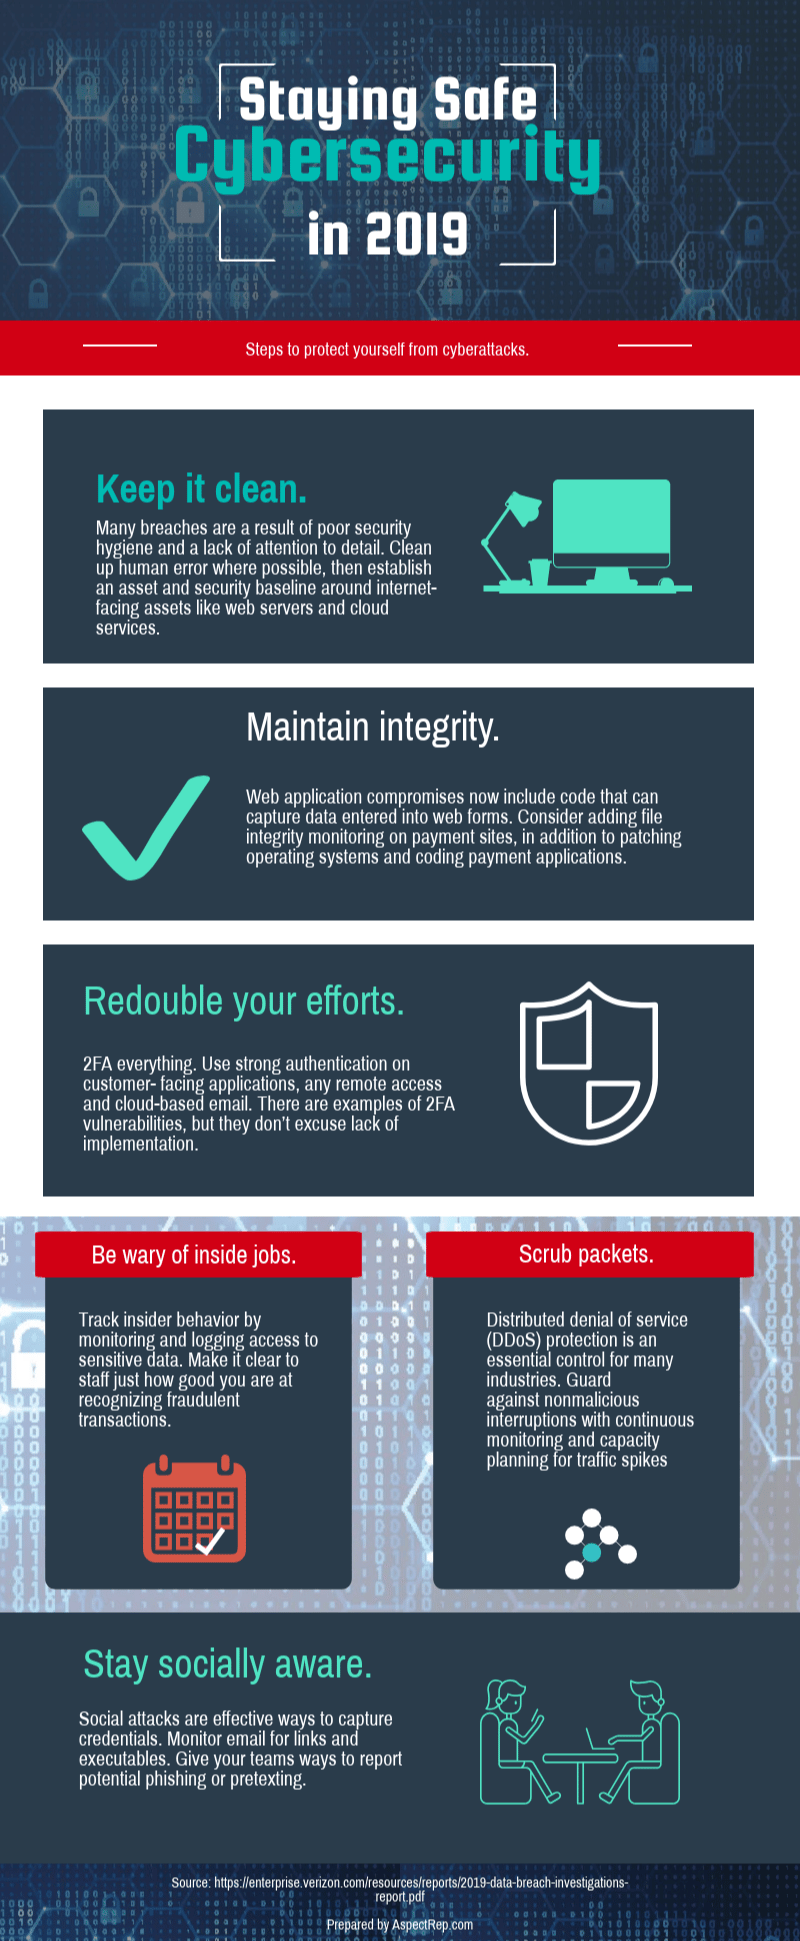 cybersecurity graphic-1